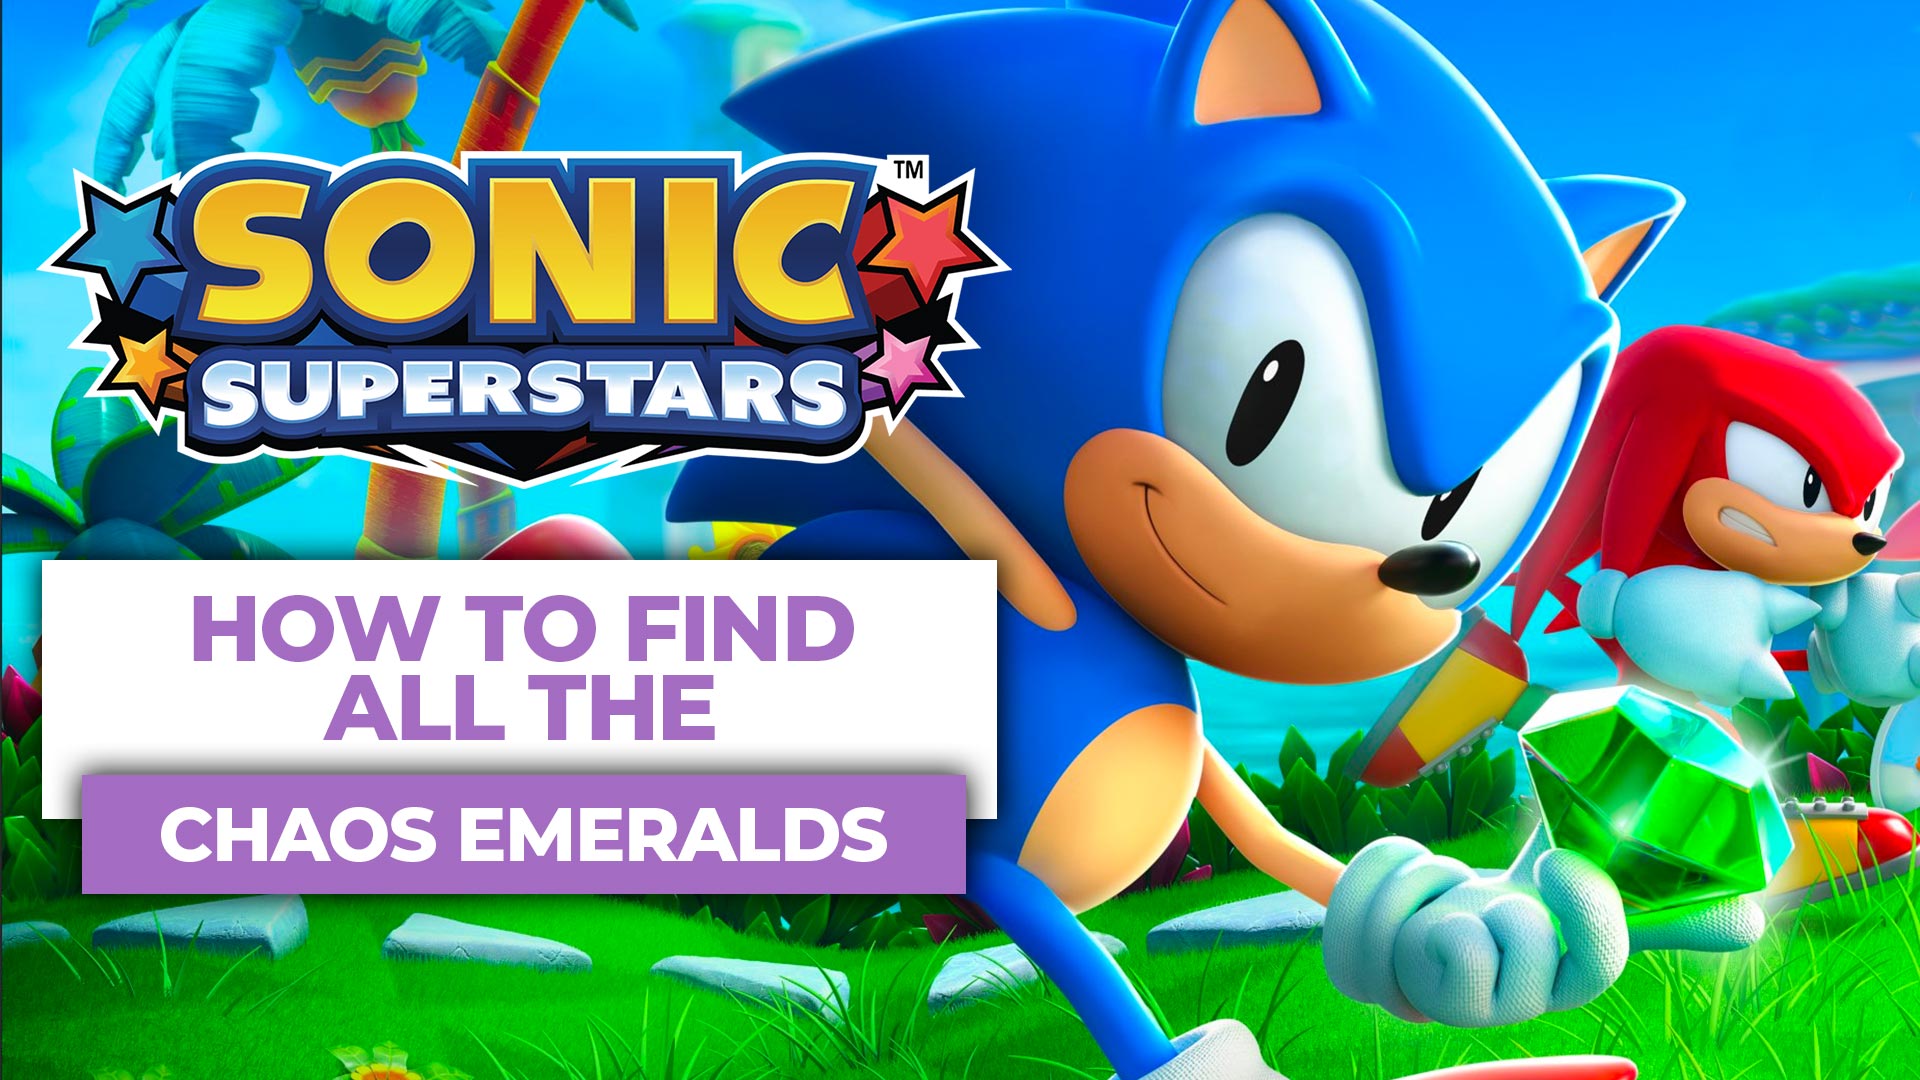 Sonic Colors: Ultimate - How to Get All Chaos Emeralds